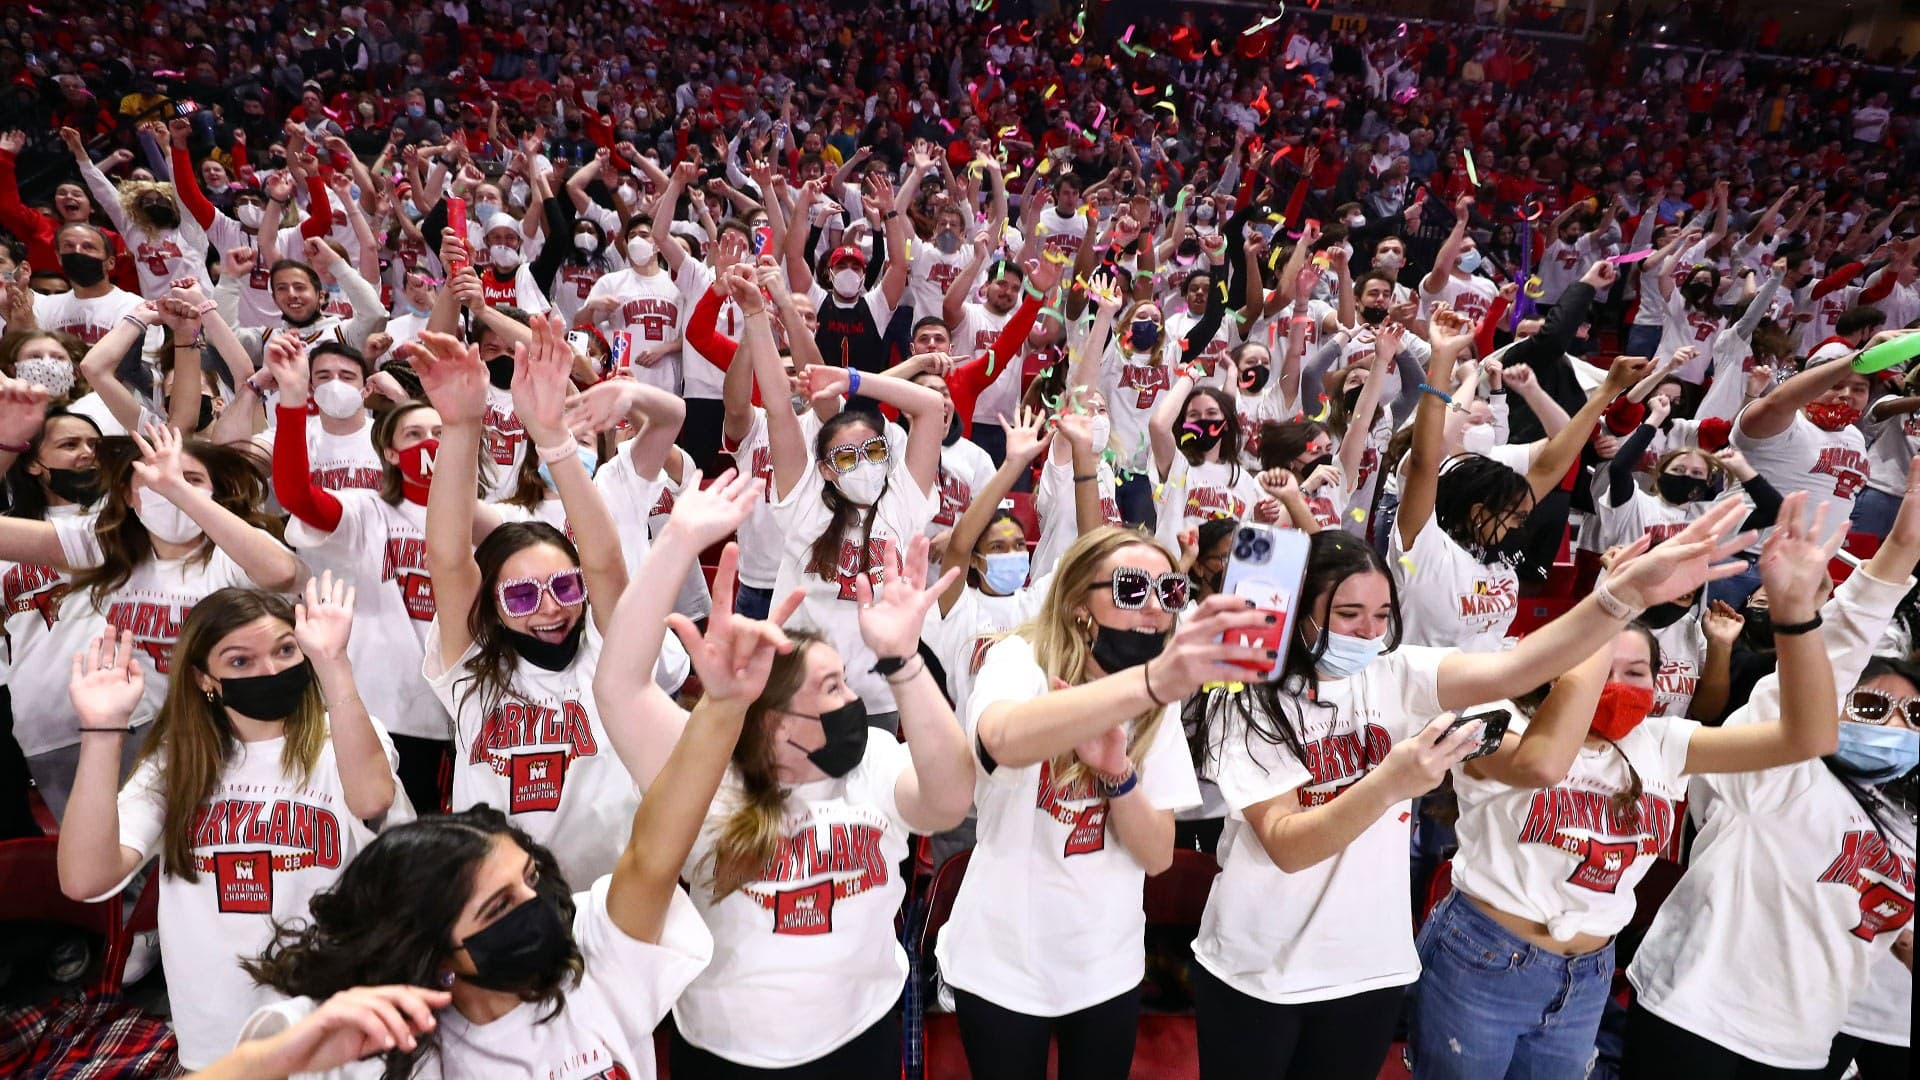 UMD students wearing matching white T-shirts dance in flash mob at basketball game